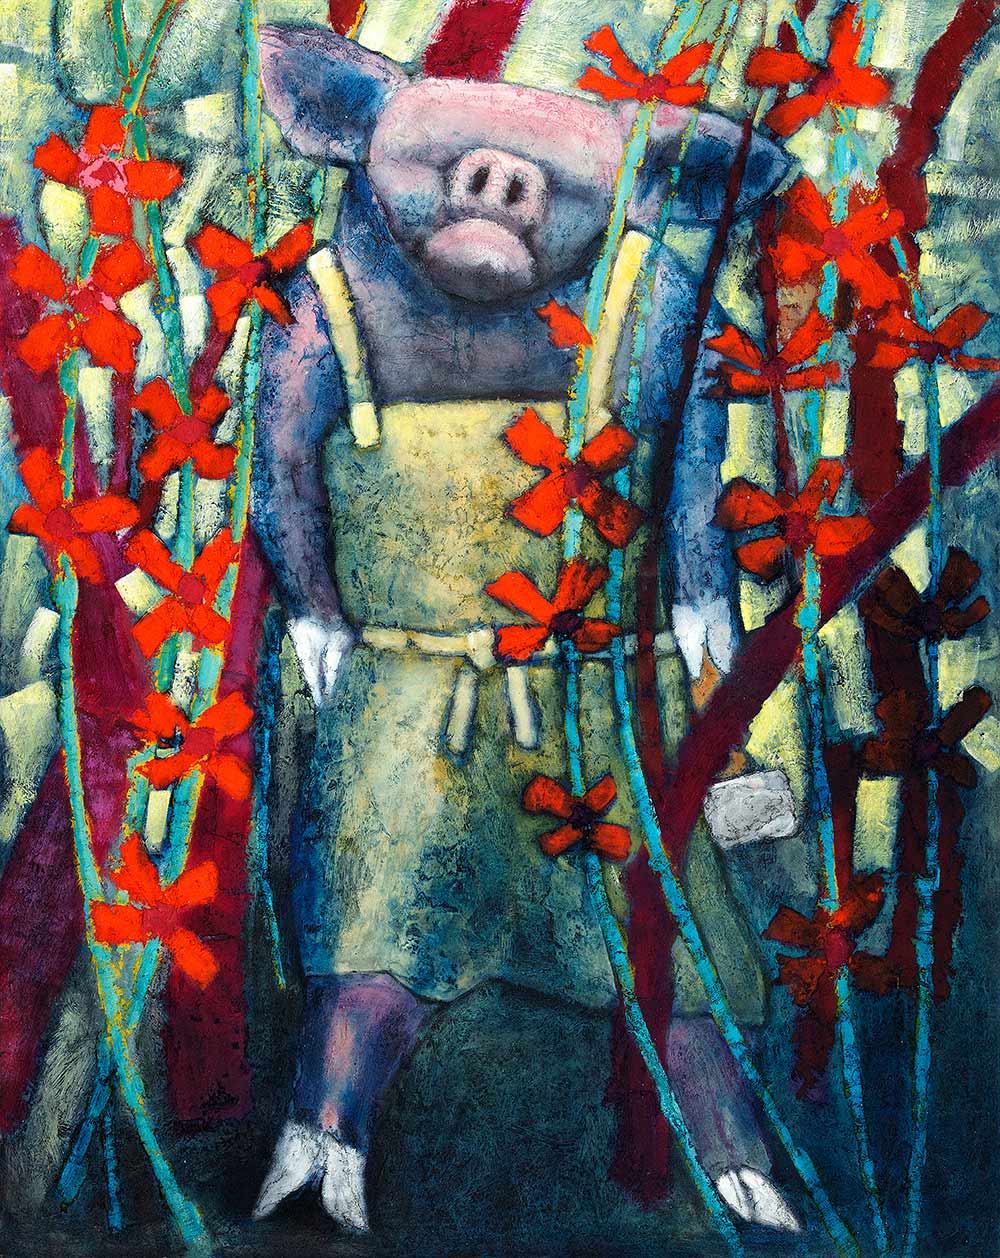 Surreal painting of a pig wearing a butcher's apron standing upright amongst trees and flowers by Welsh artist Mark Lloyd Williams